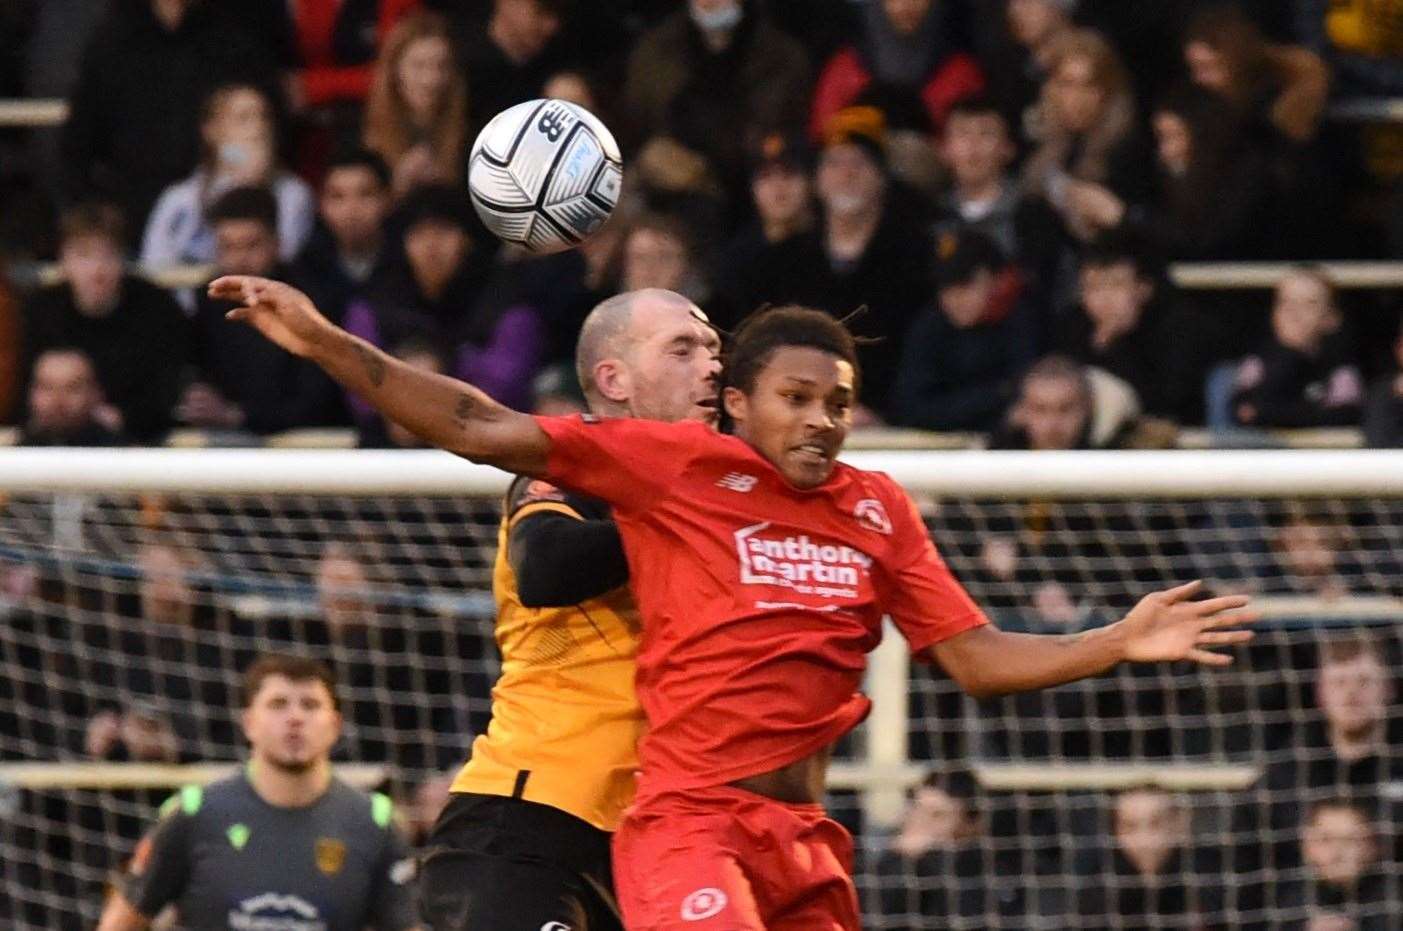 Maidstone defender Joe Ellul climbs for a header in the win over Welling Picture: Steve Terrell